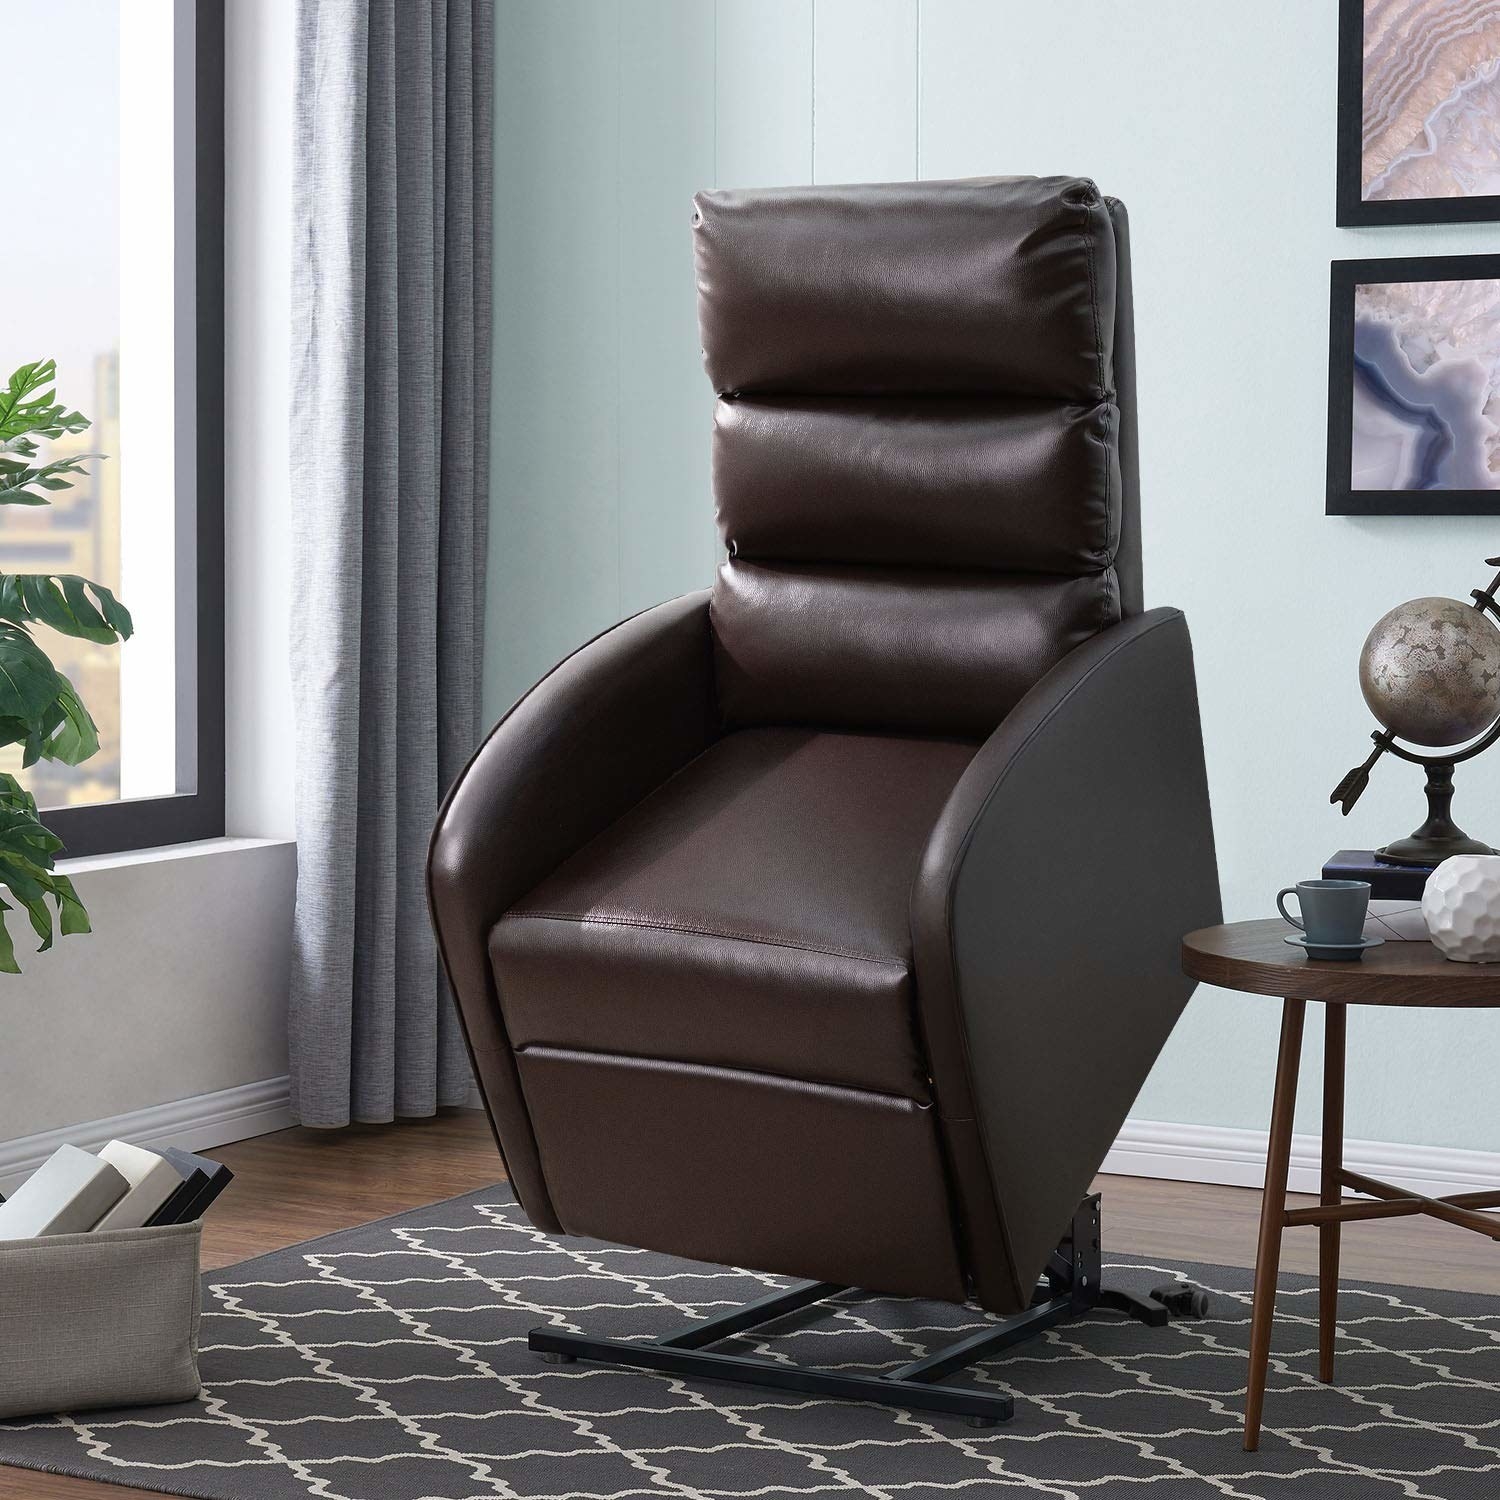 The lifted recliner in a living room